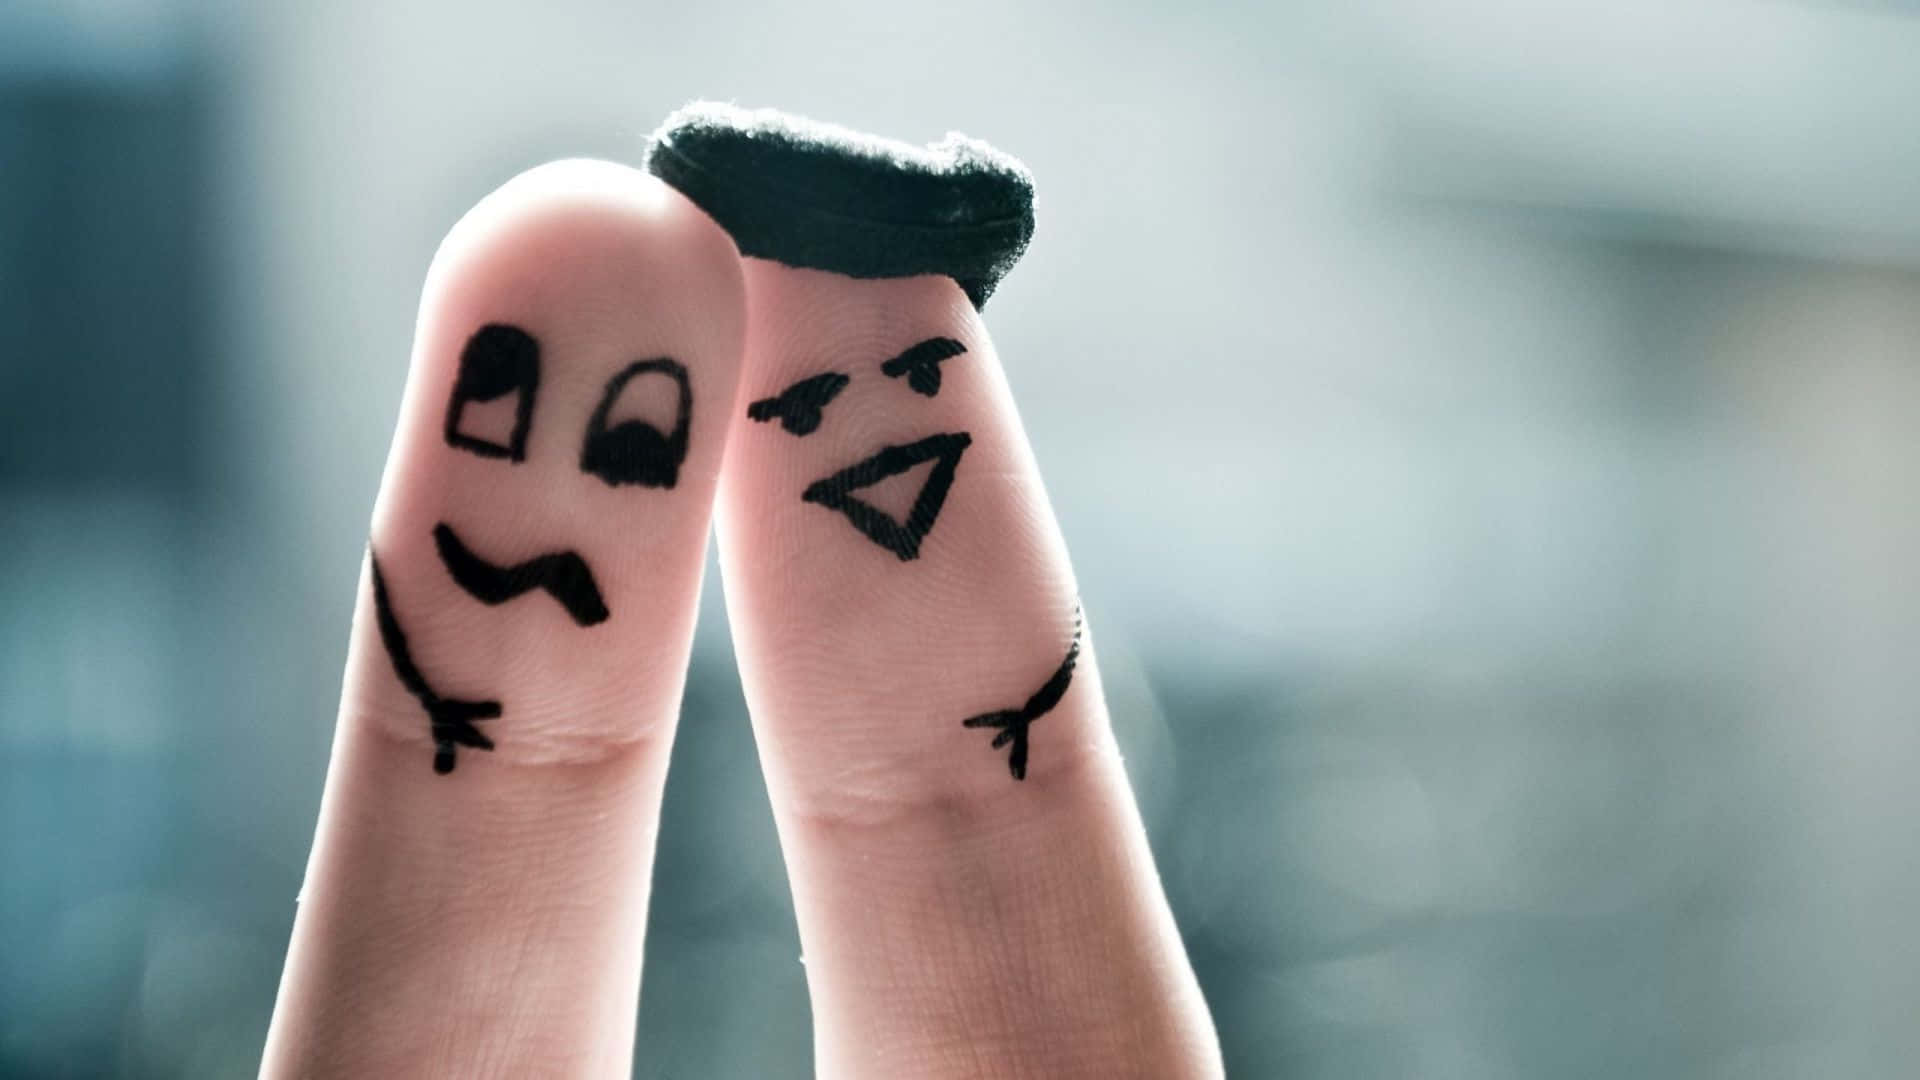 Two People Holding Their Fingers Up With Faces Drawn On Them Background